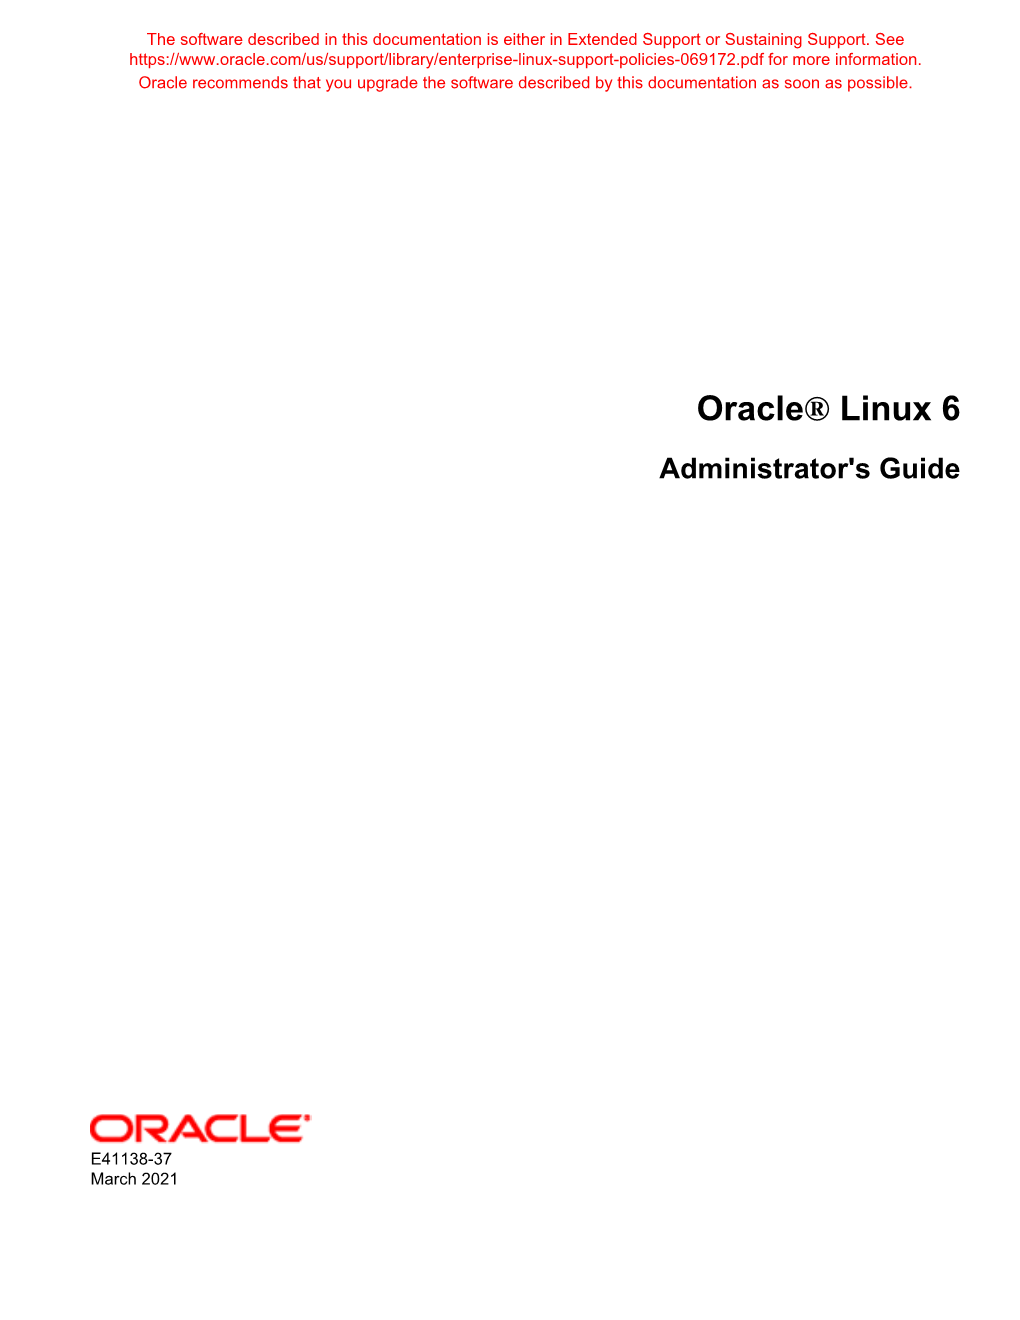 Oracle® Linux 6 Administrator's Guide